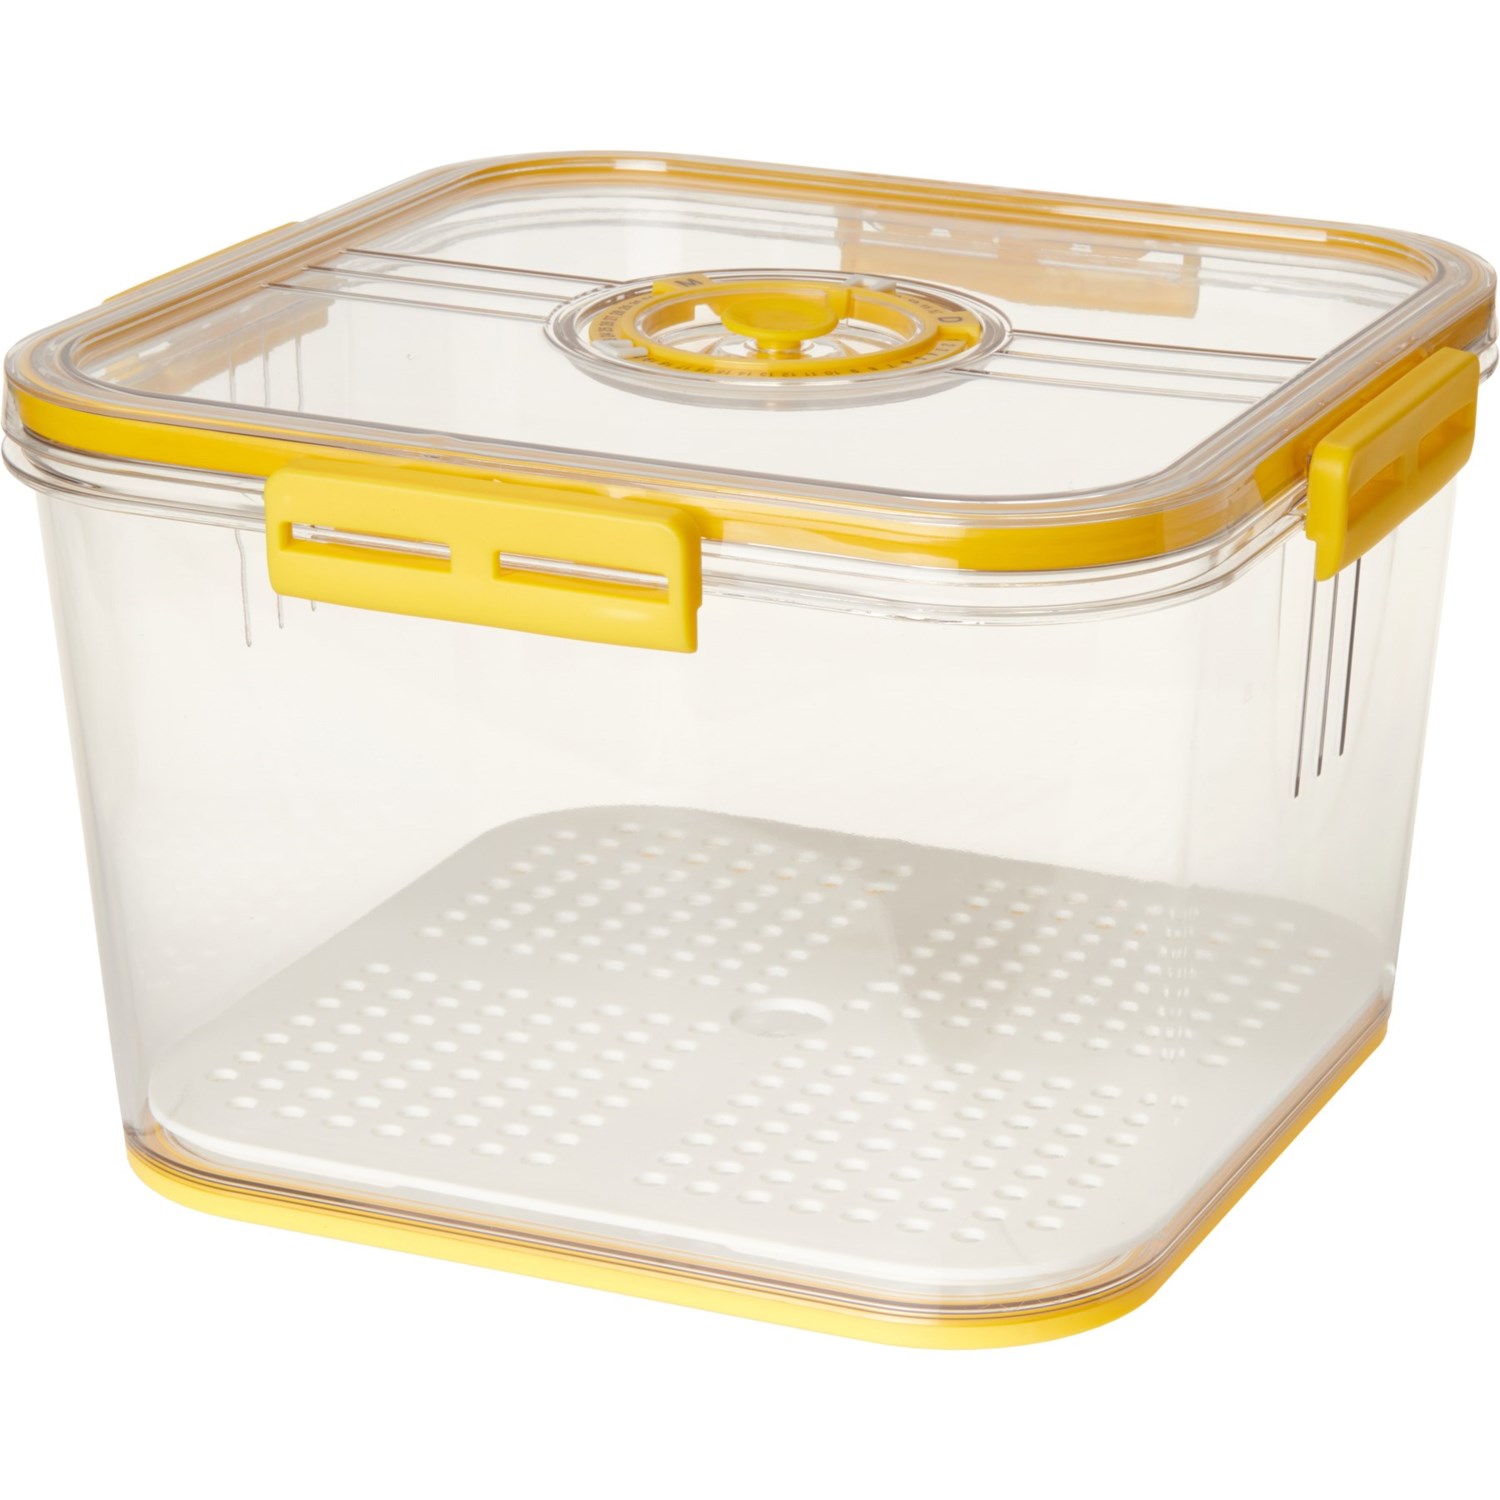 Rubbermaid: Food Containers, Home Organization & Outdoor Storage